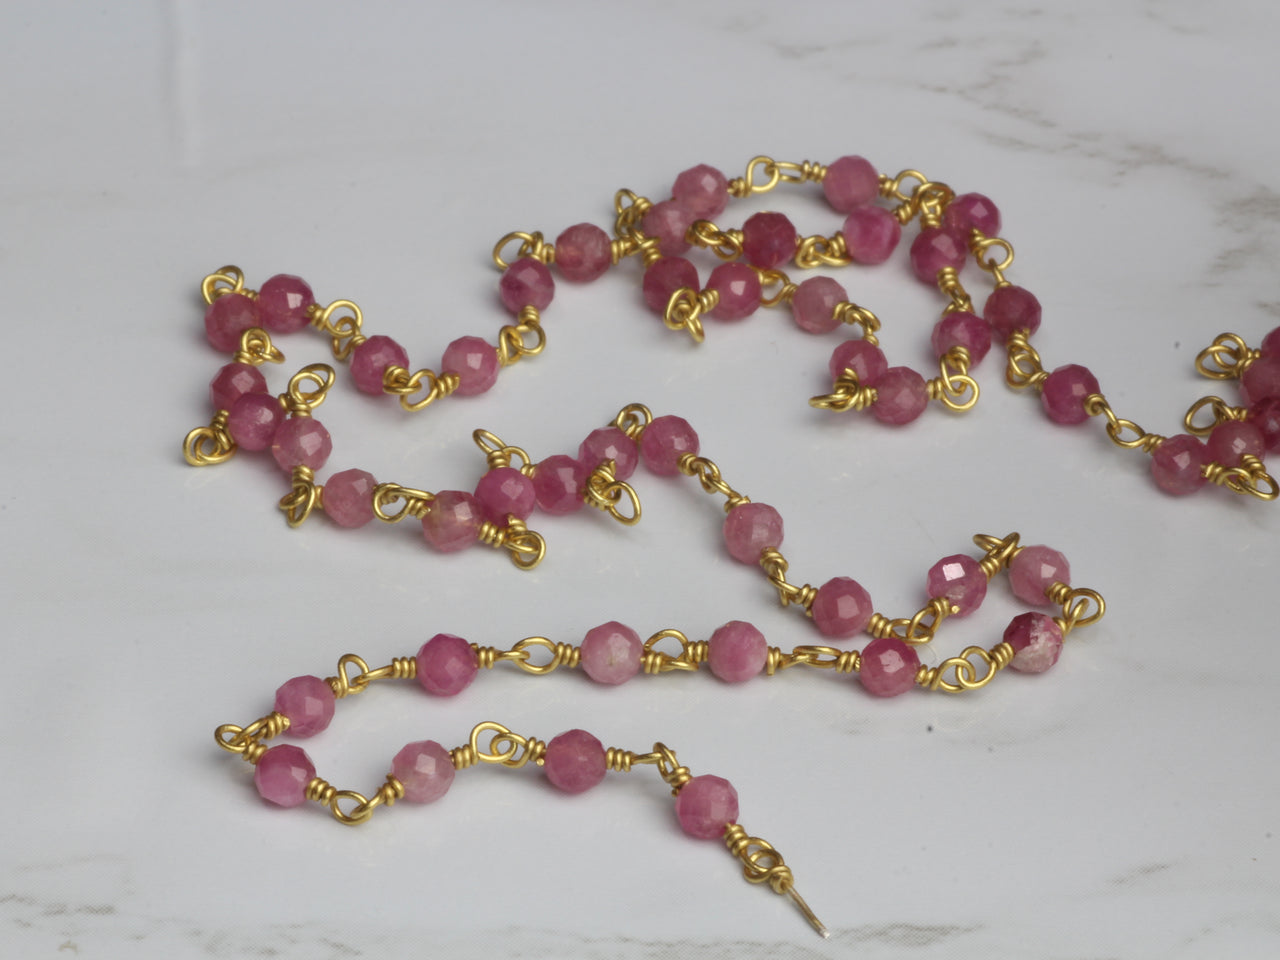 Ombre Pink Tourmaline 3mm Faceted Rounds Rosary Chain Sterling Silver with Gold Plating Wire Wrap Chain by the Foot